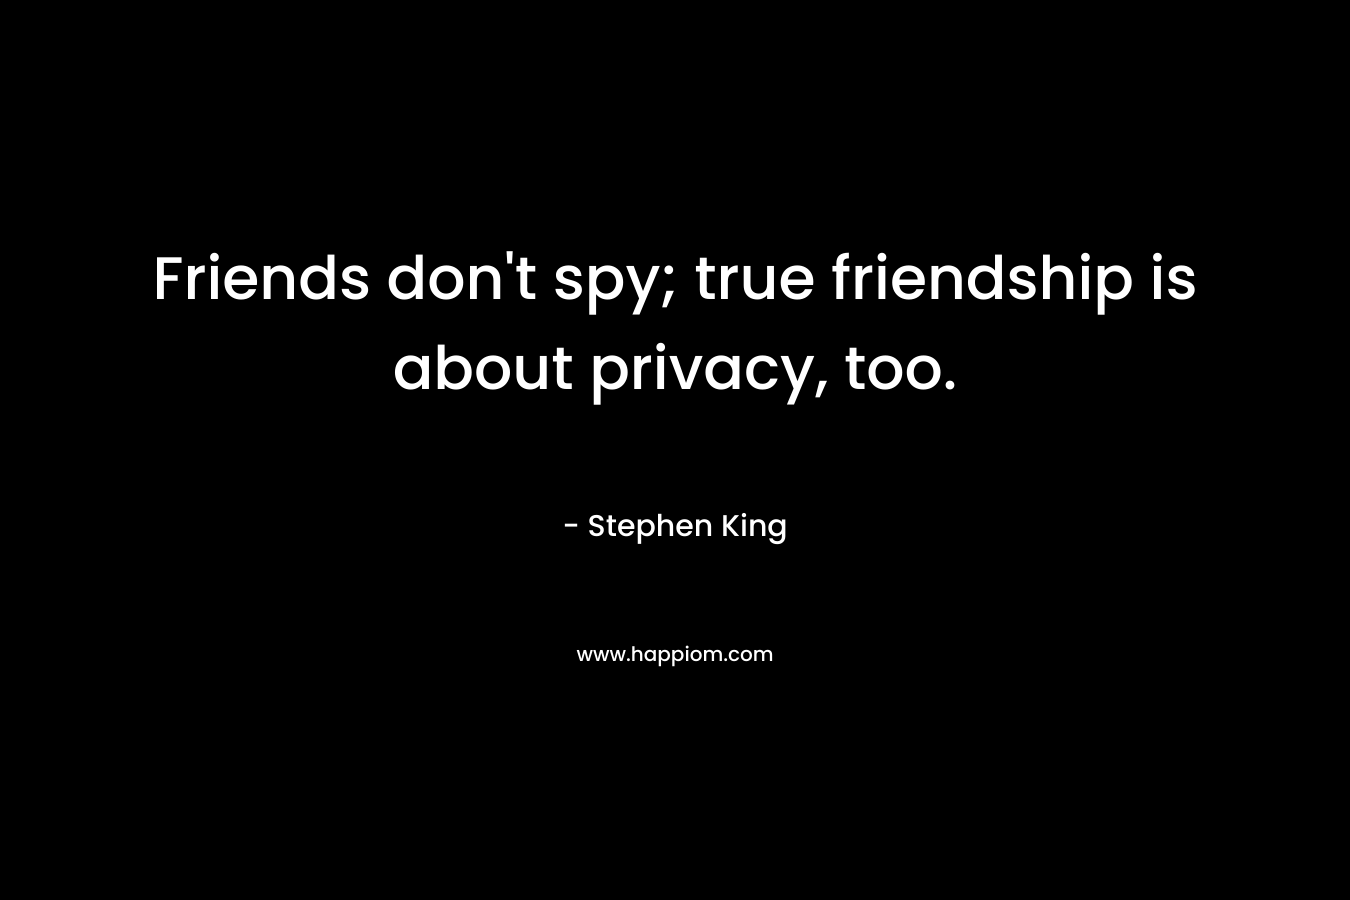 Friends don't spy; true friendship is about privacy, too.